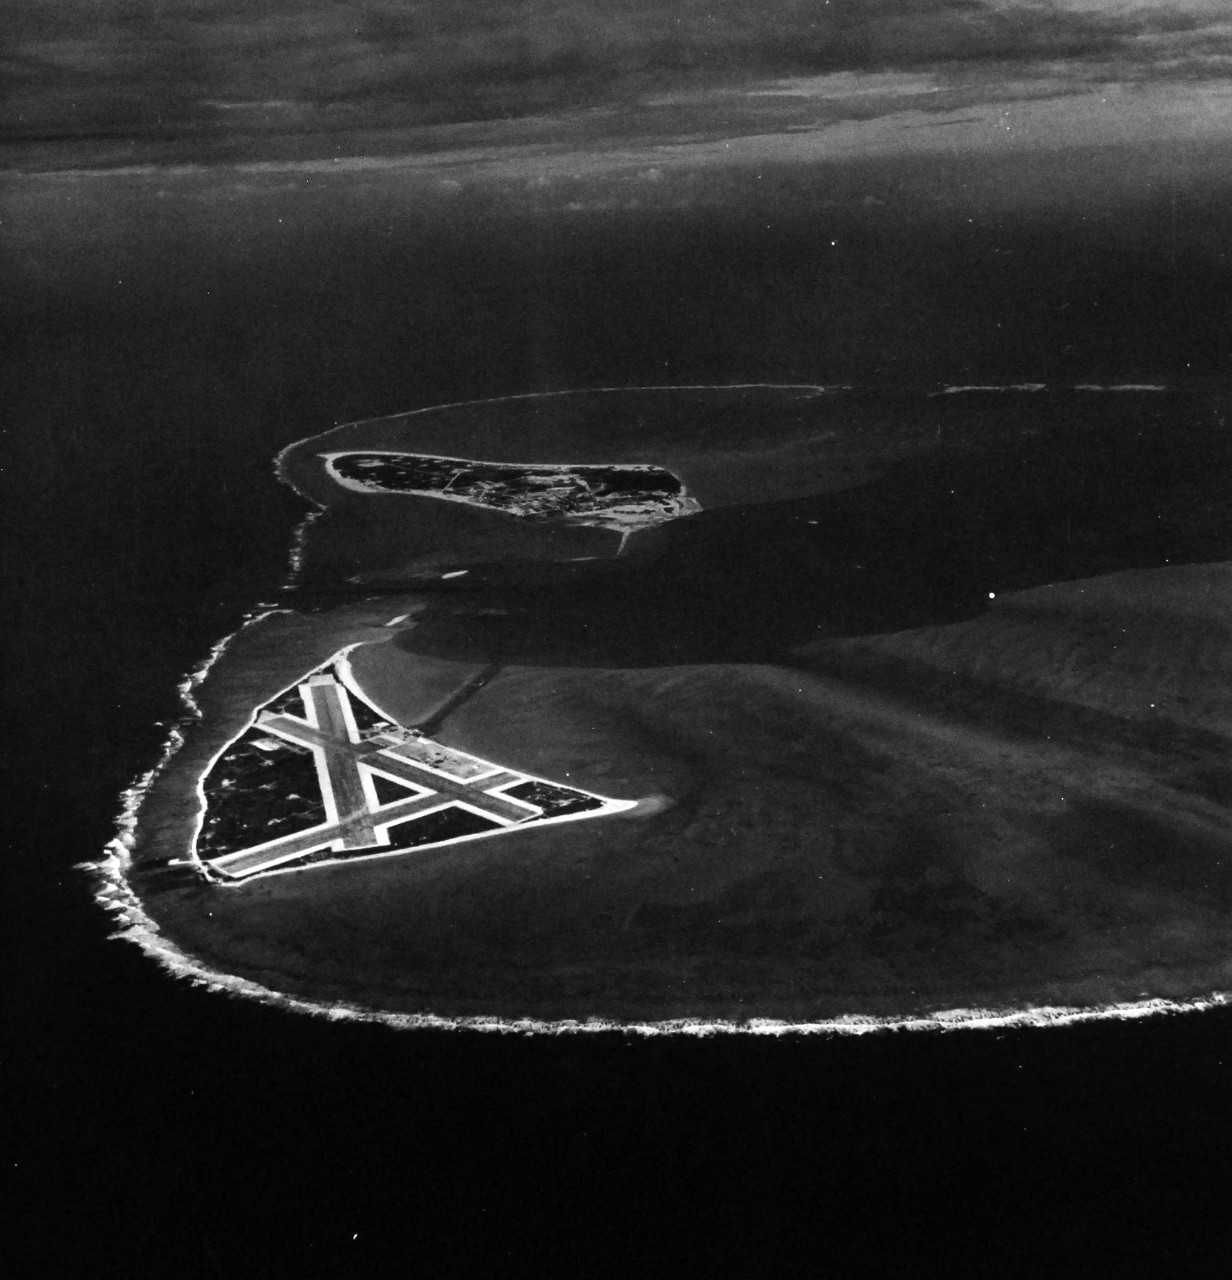 80-G-451086:  Midway Island:  November 1941.   Eastern Island with Sand Island in background looking East.  Photographed by Wolf, November 24, 1941.   U.S. Navy photograph, now in the collections of the National Archives.   (2015/11/03).